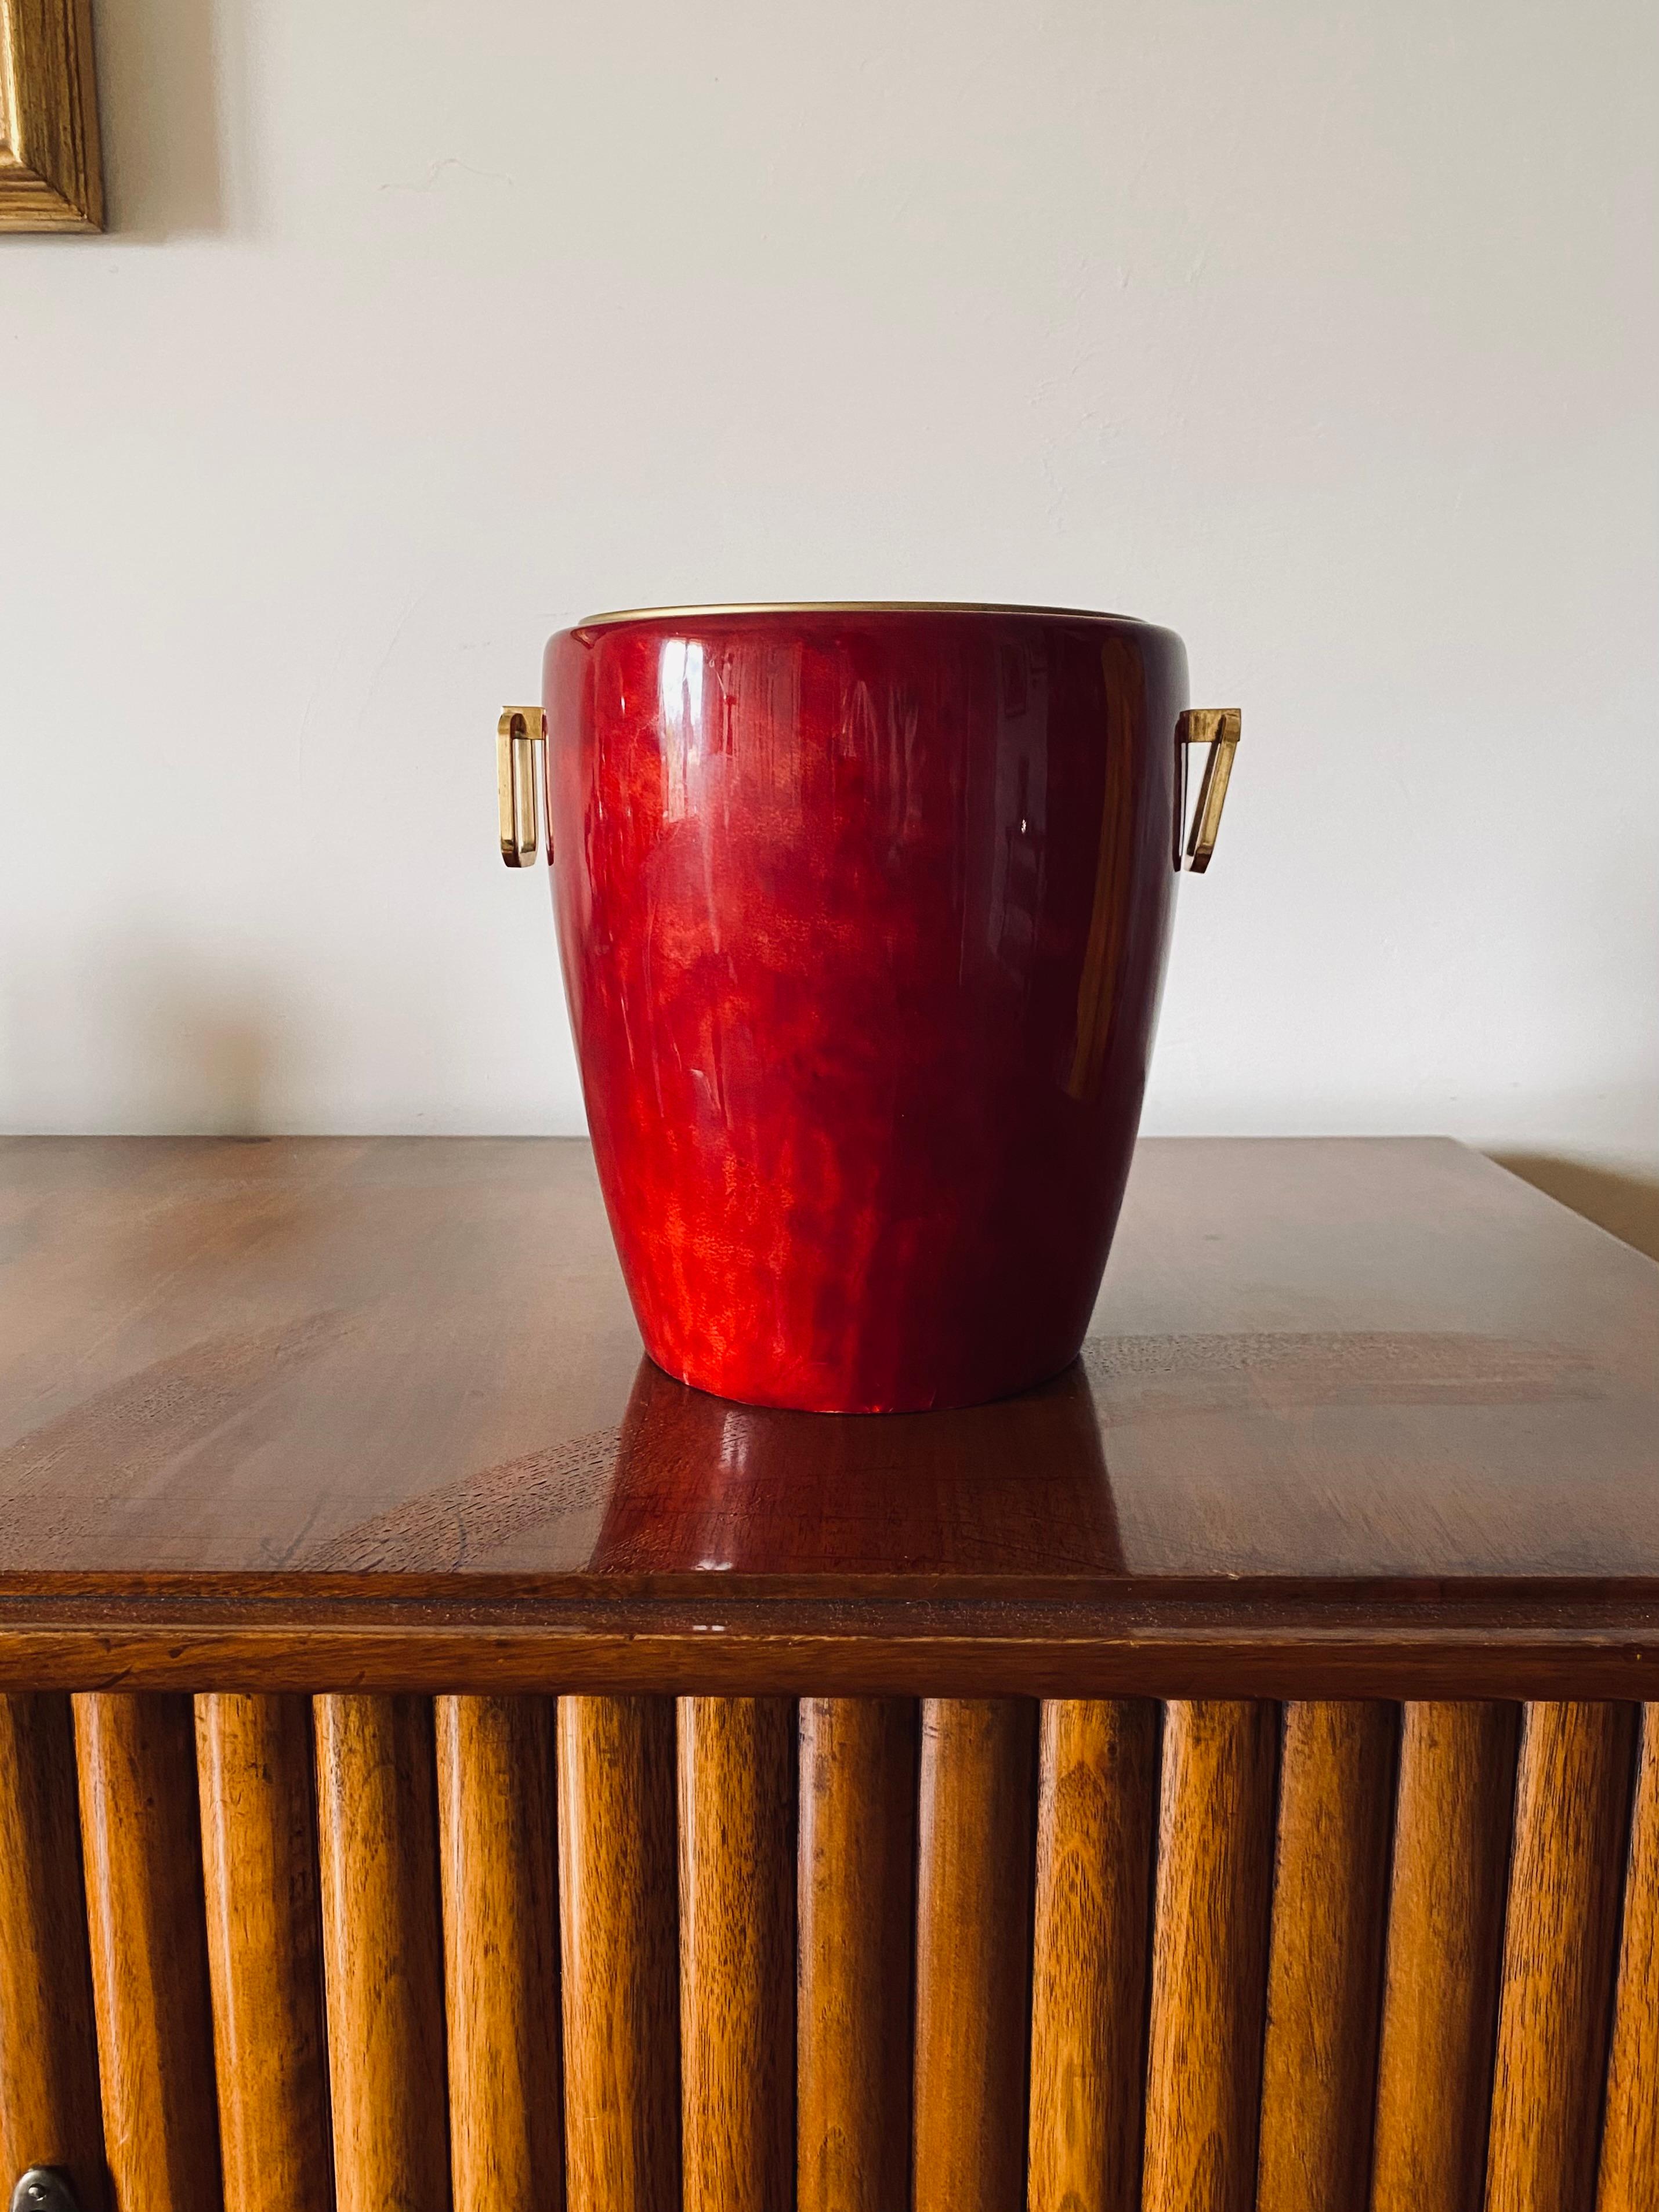 Aldo Tura, Brass and red Parchment cooler / Icebucket

Italy 1960s

H 23 cm

diam. 22 cm

Conditions: excellent consistent with age and use.